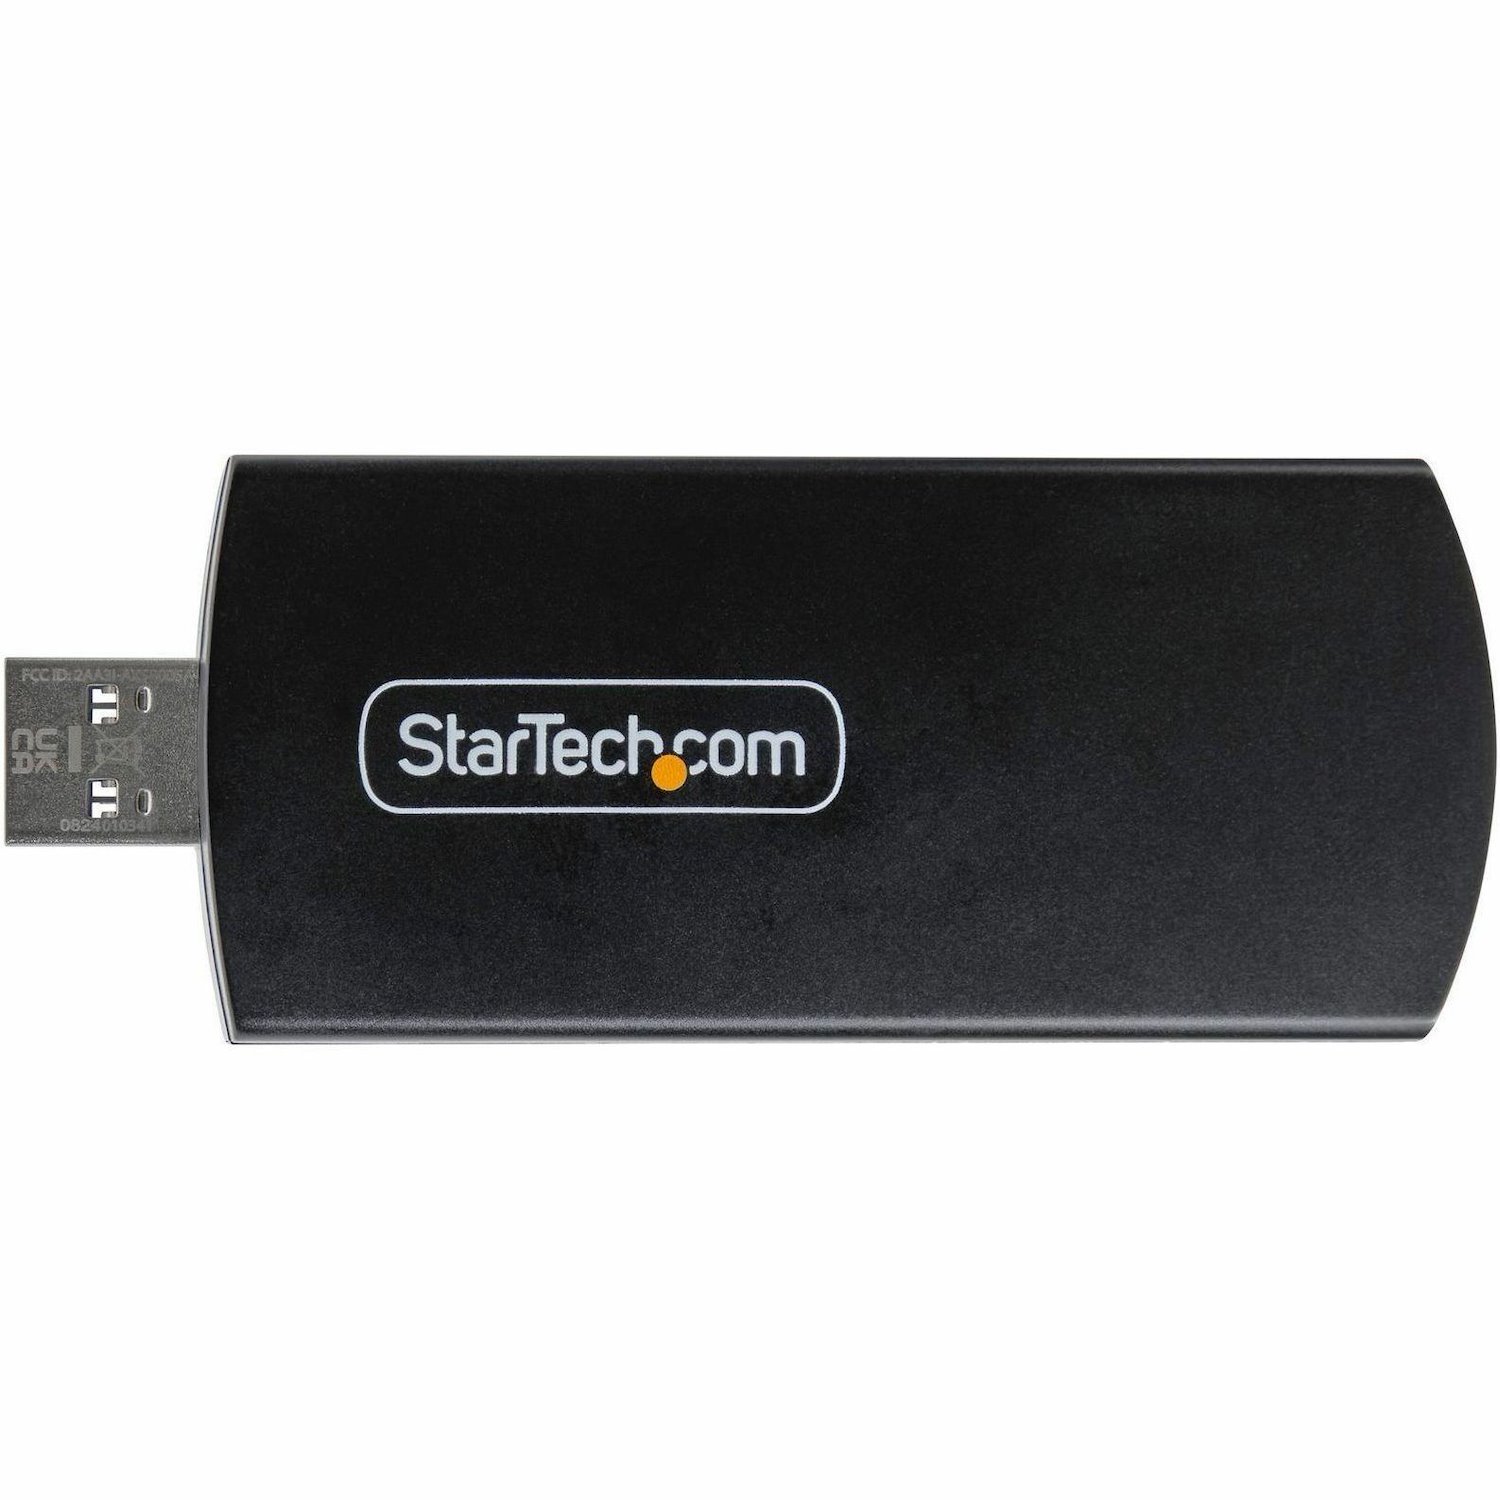 StarTech.com Wi-Fi 6E USB Adapter/Dongle, For Desktop/Laptop PC, Wireless NIC Up To 2402Mbps, WiFi 2.4/5/6GHz Network, 802.11ax